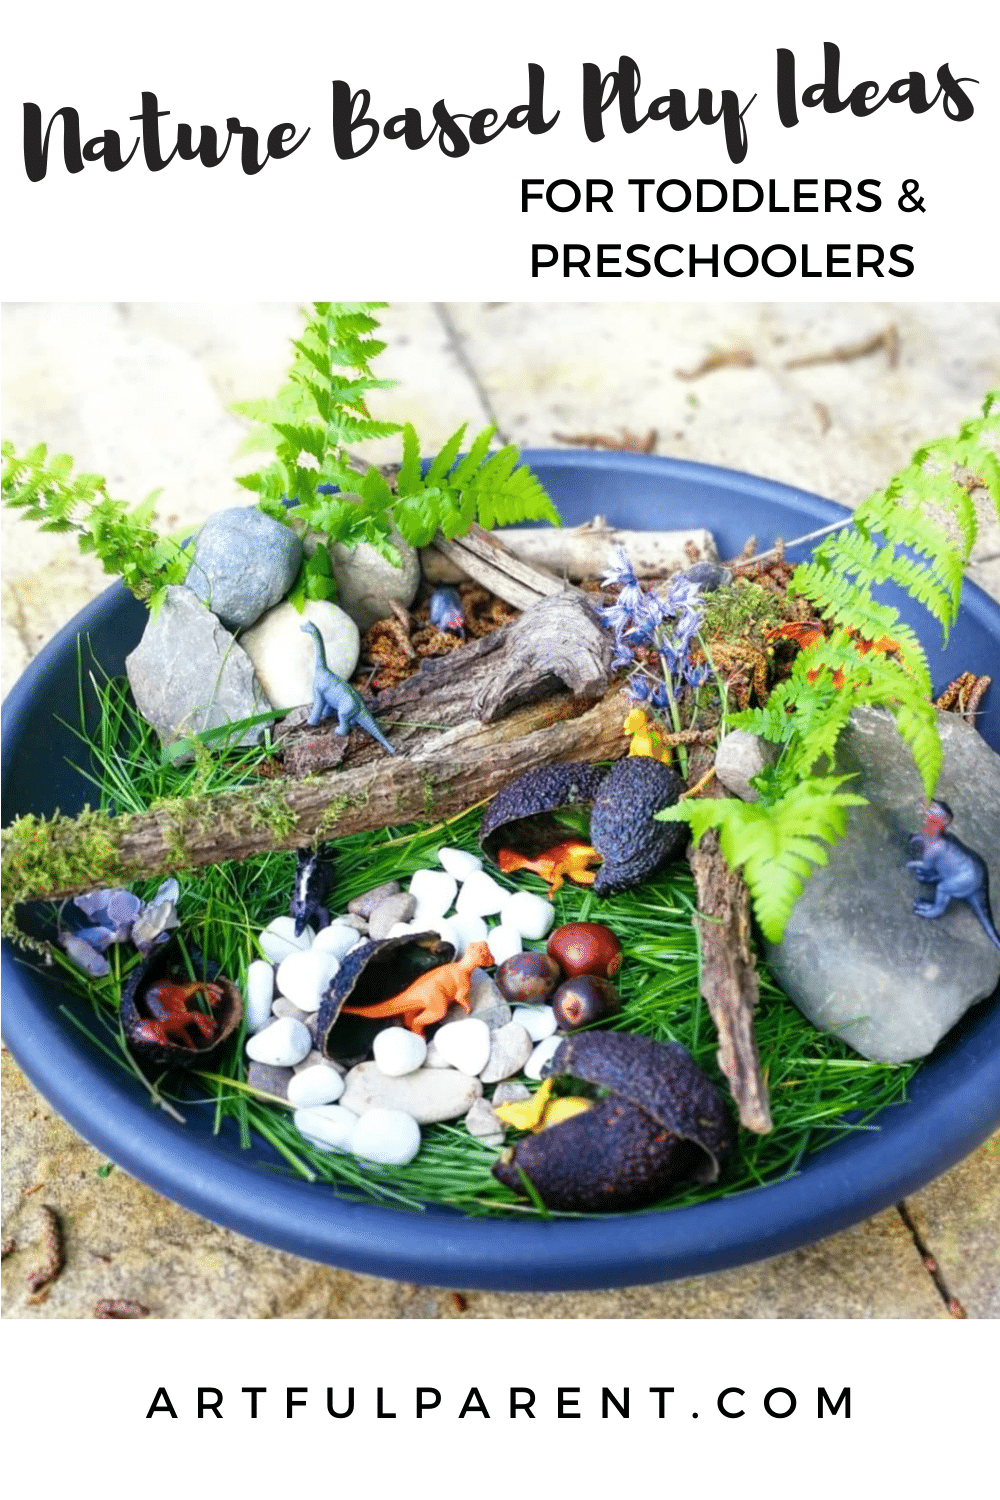 5 Nature Based Play Ideas for Toddlers & Preschoolers